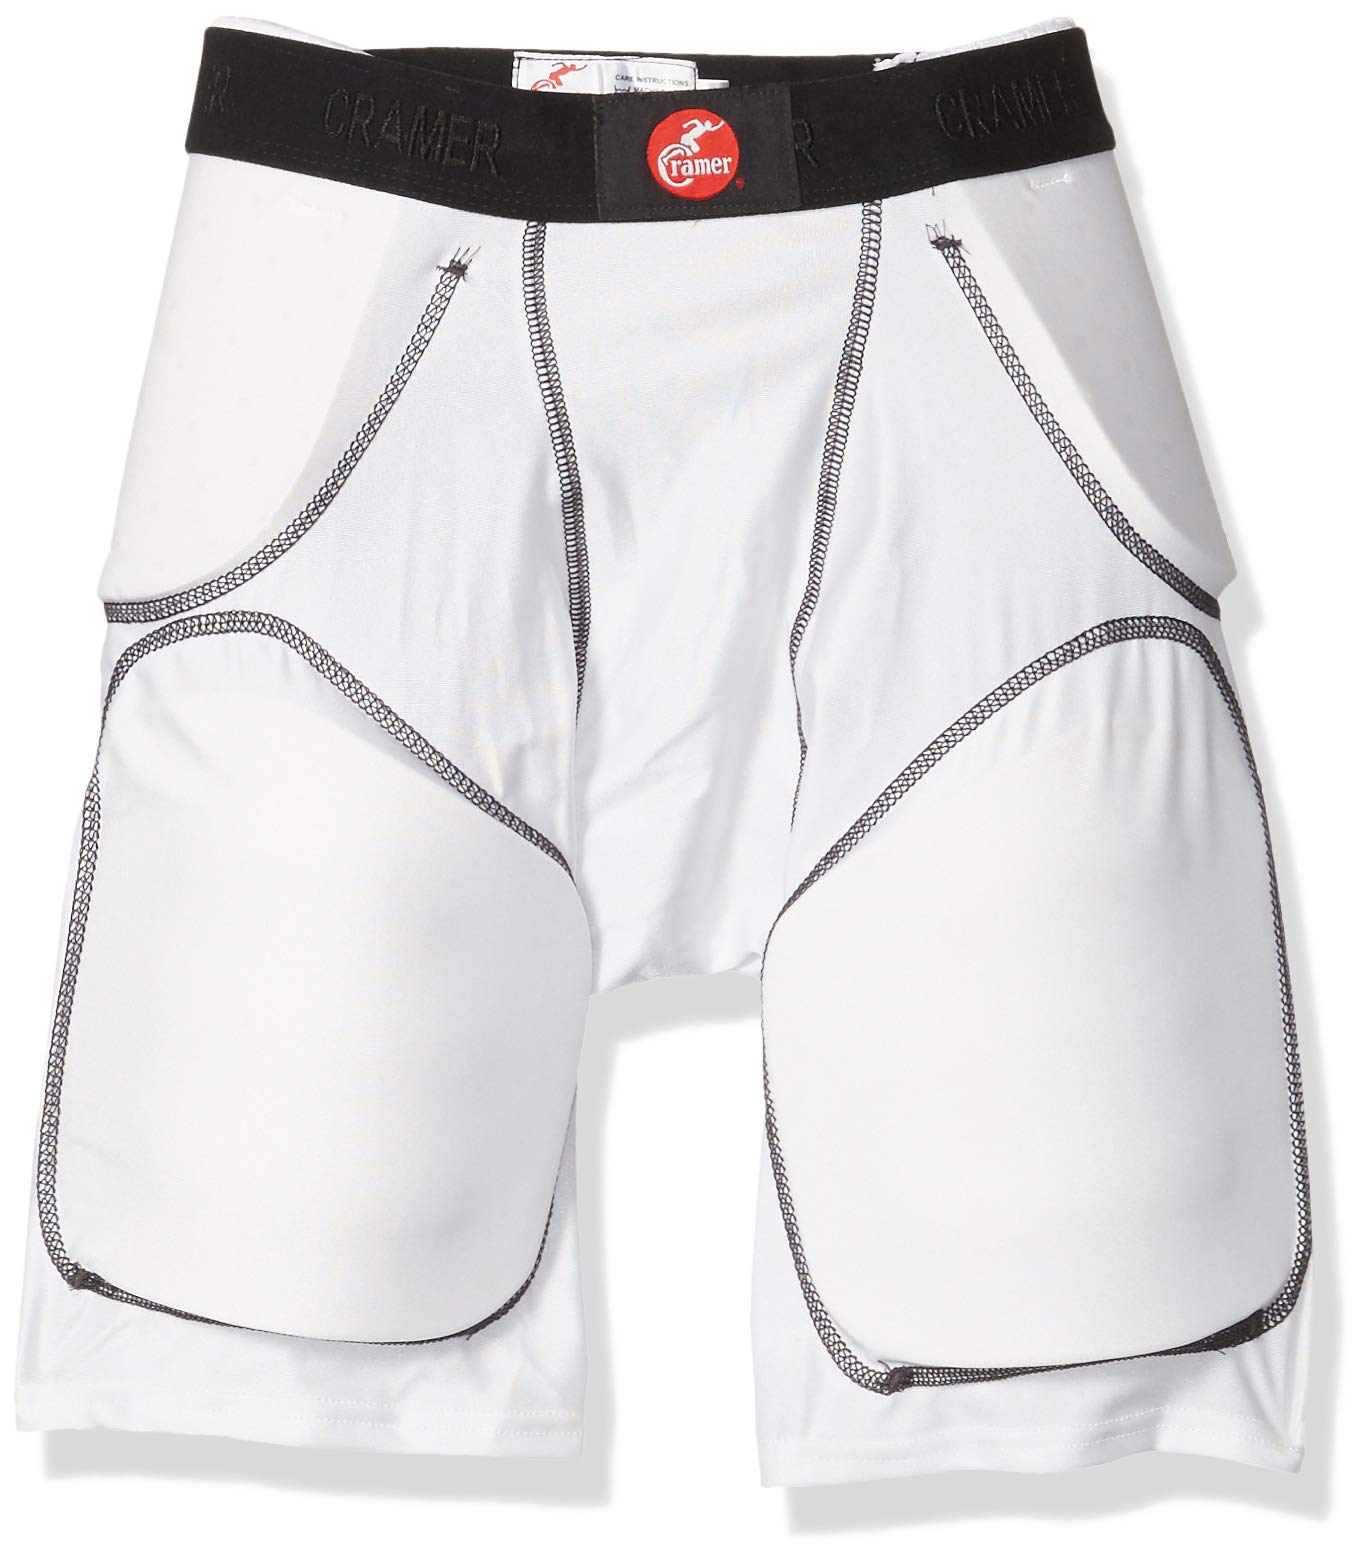 Cramer Classic 5-Pad Football Girdle with Hip, Tailbone and Thigh Pads